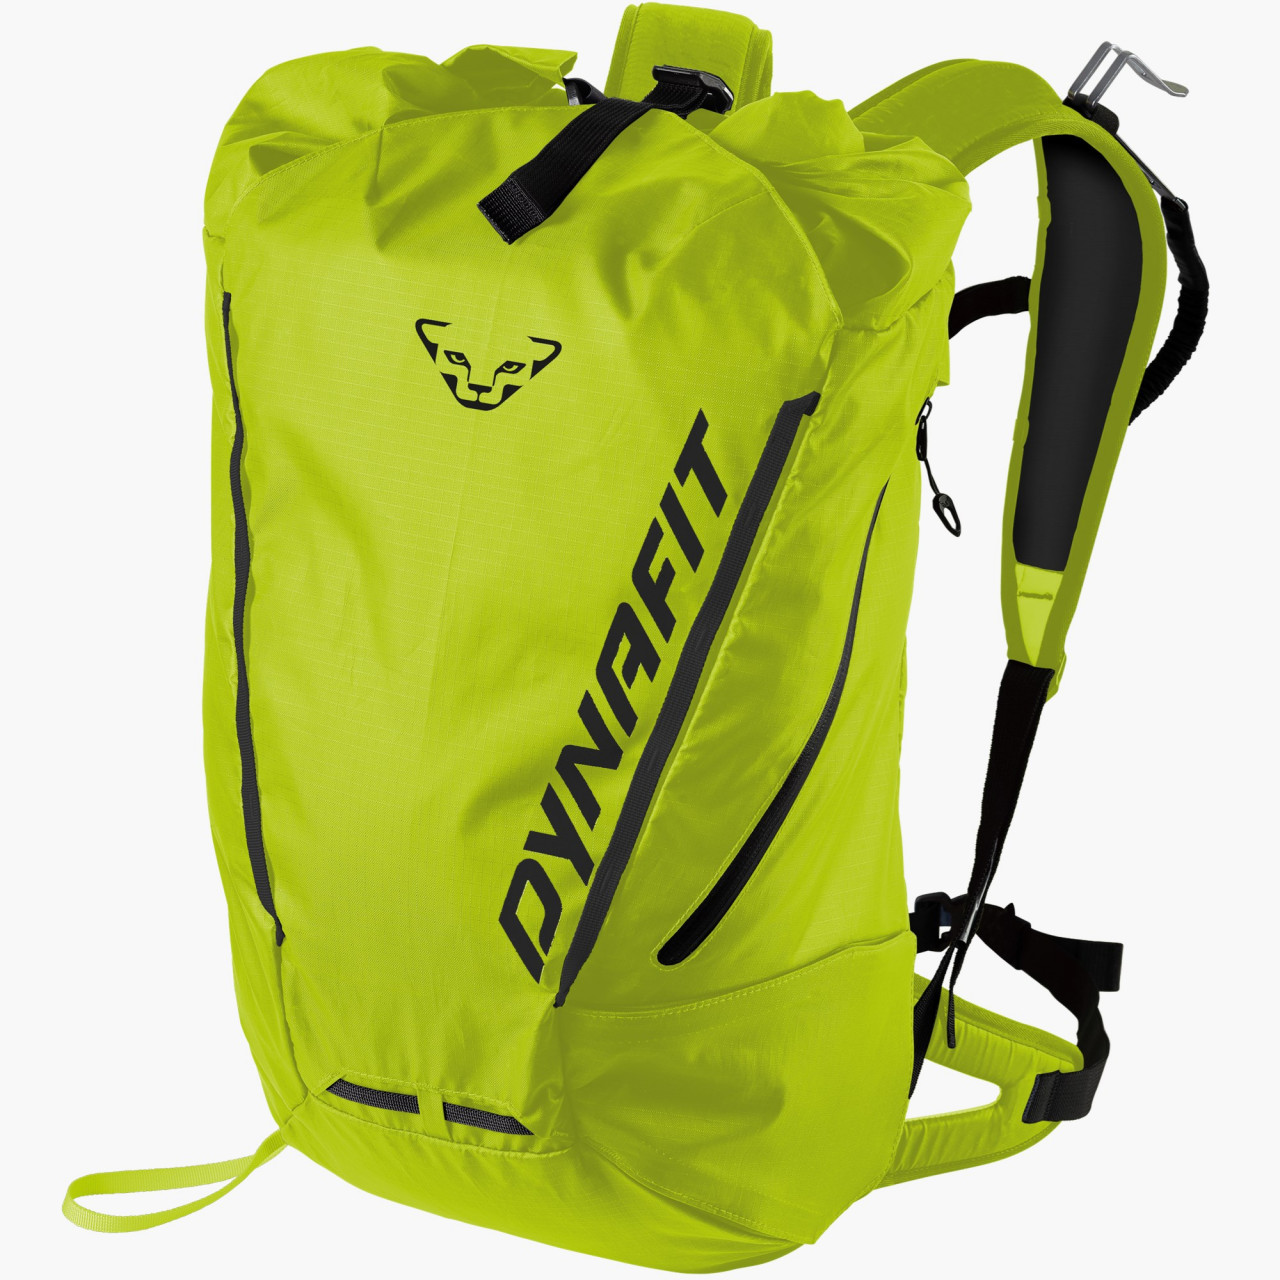 Transporter WP Duffel 70 - IPX7 Waterproof Expedition Bag